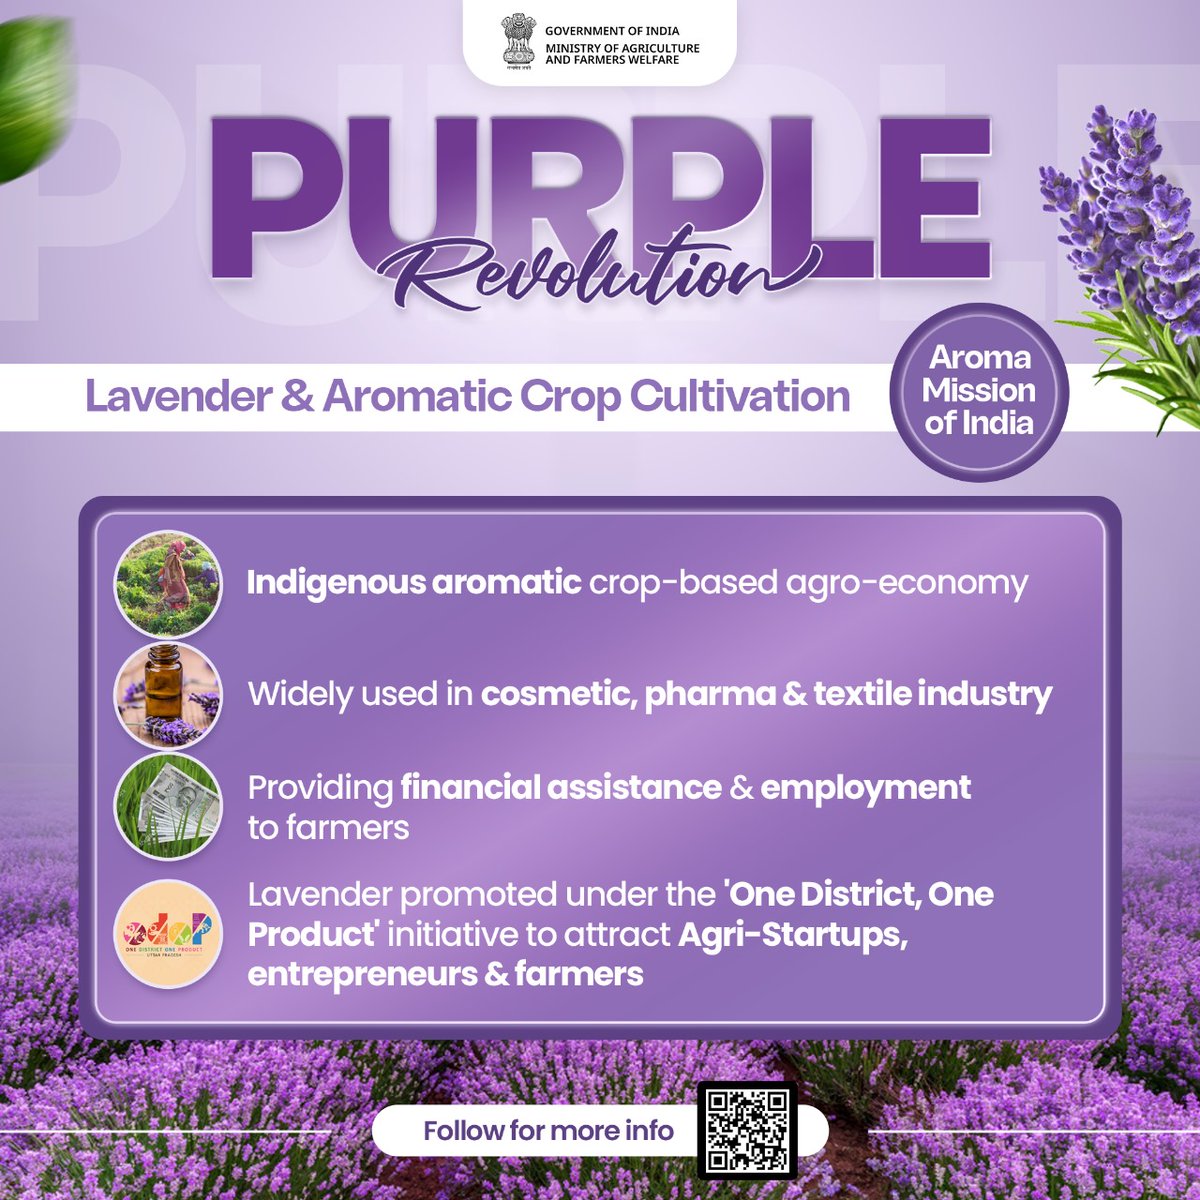 #PurpleRevolution through lavender farming is changing the landscape and opening new arenas for farmers

#AnnadatakaSamman #FarmersFirst #FarmersWelfare